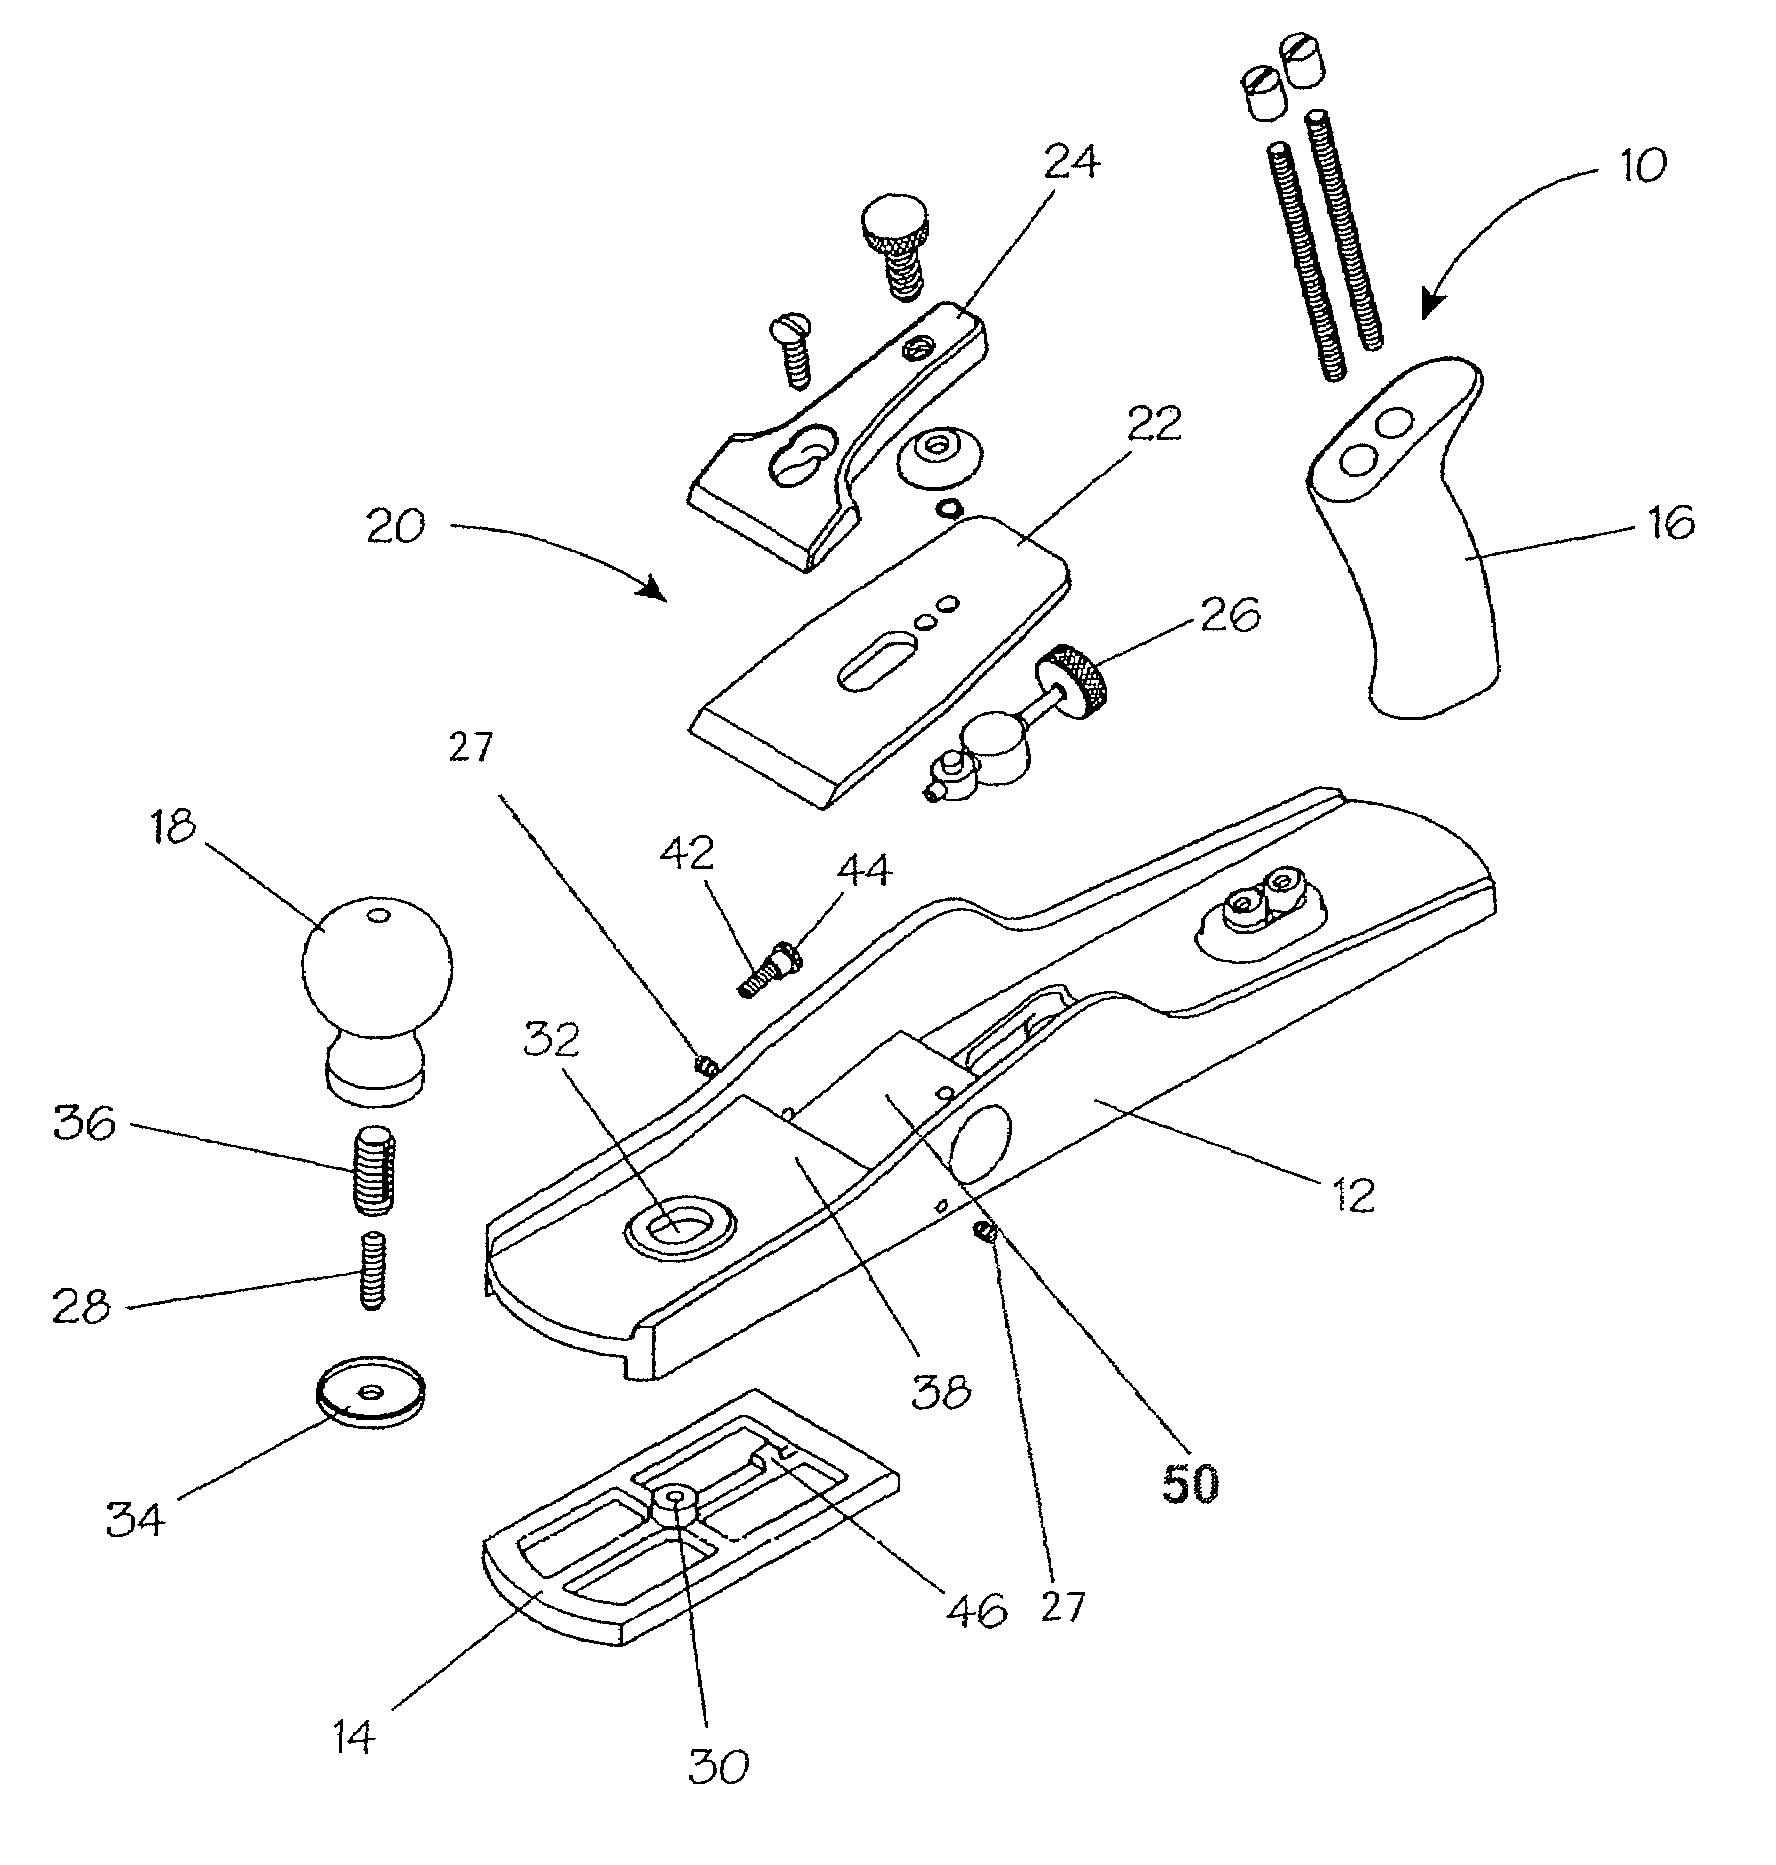 Woodworking plane with adjustable mouth